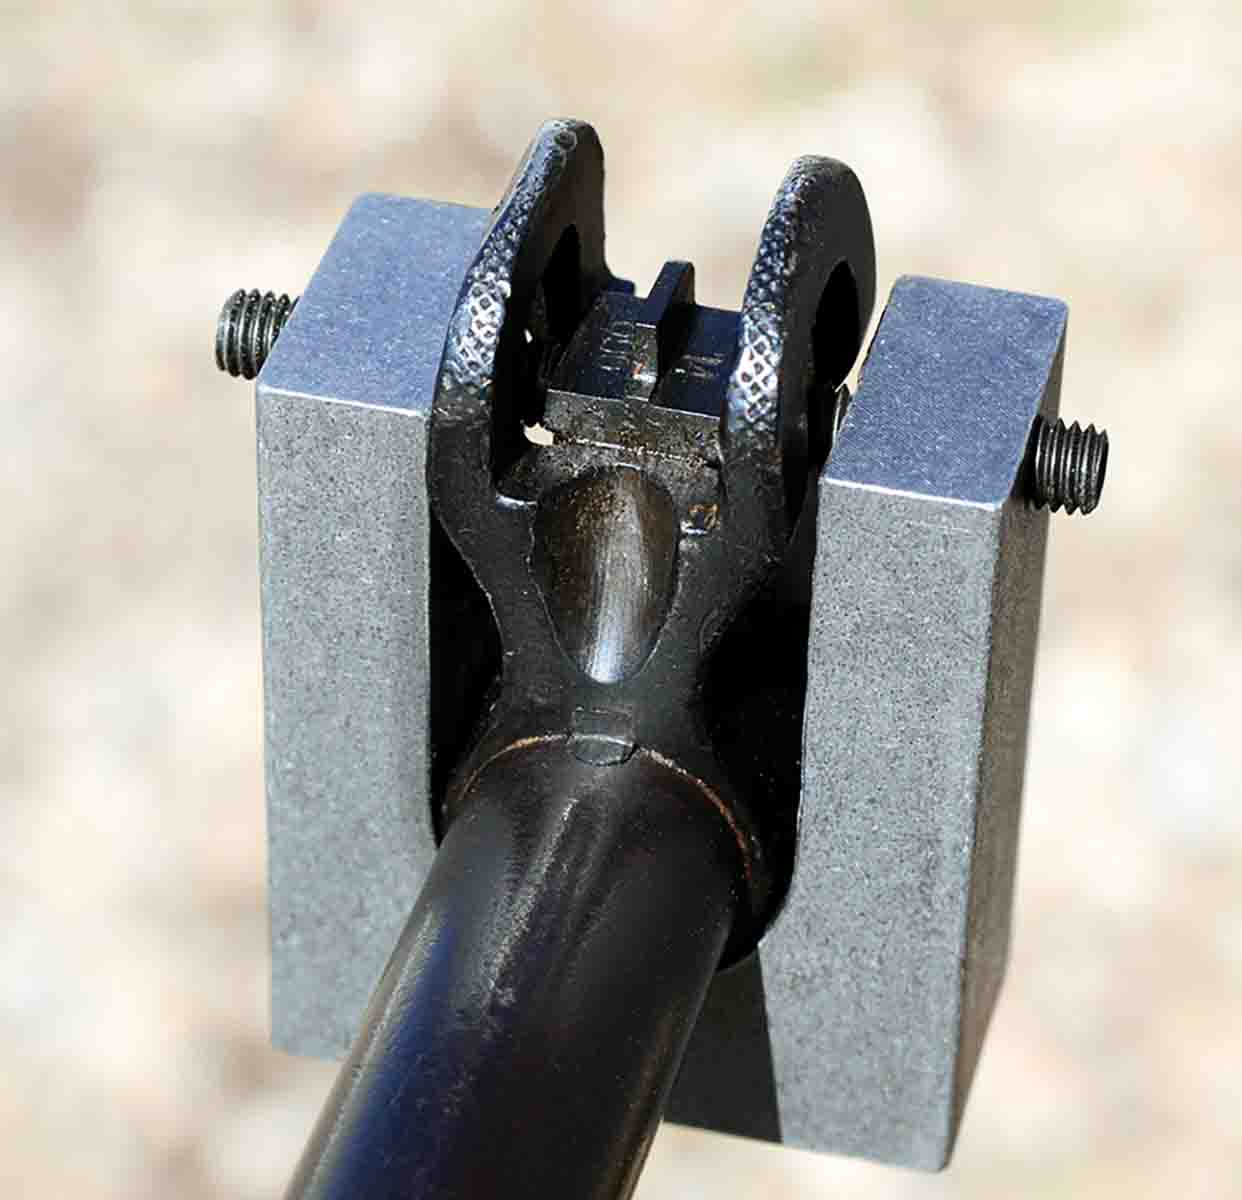 Formerly a part of a military armorer’s kit, this block fits on U.S. Model 1917 barrels so that front sight blades can be moved precisely by the screws.